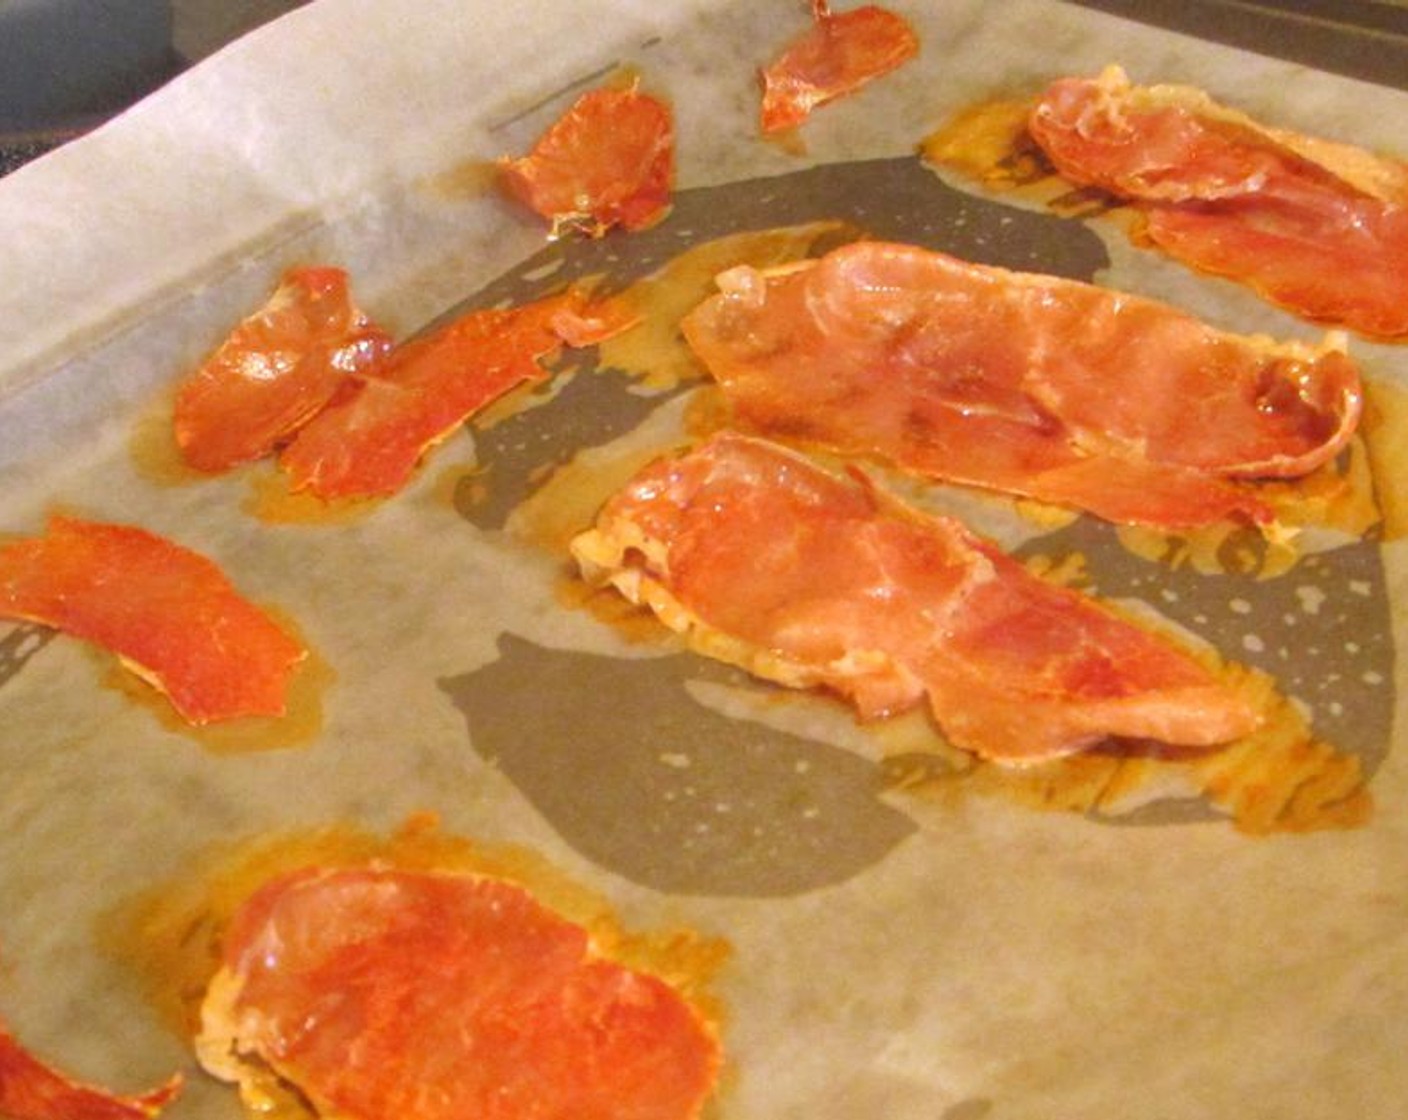 step 3 Remove the prosciutto and place it on a paper towel to cool. Cover the baking sheet with aluminum foil. Add some Olive Oil (as needed) to the baking sheet, and return the baking sheet to the oven.